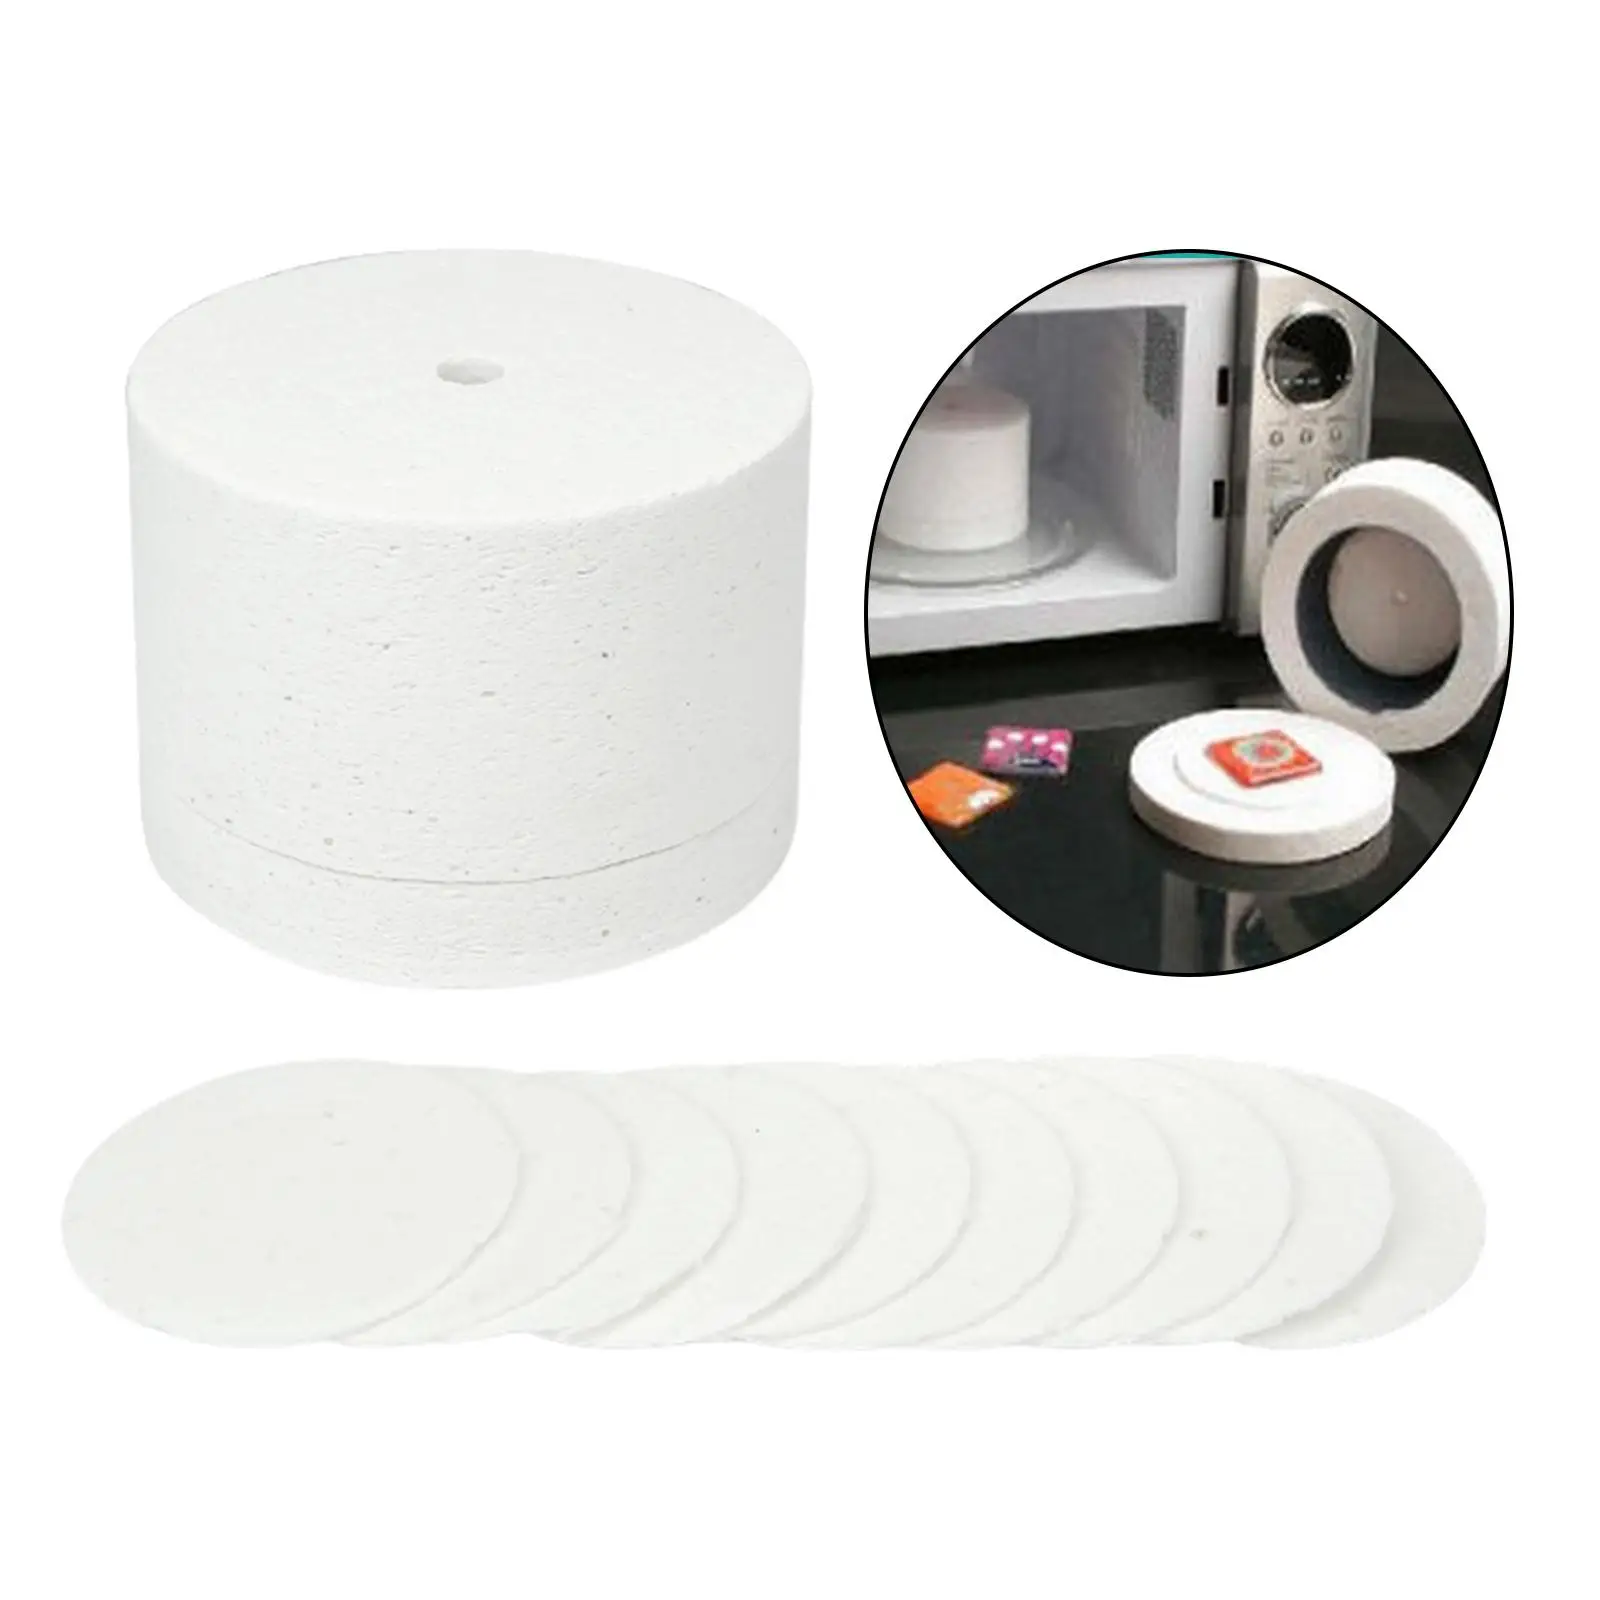 Ceramic Microwave Kiln Small with Kiln Paper Professional for Jewelry , Melting Stained Glass, Fusing Supplies, Beginner